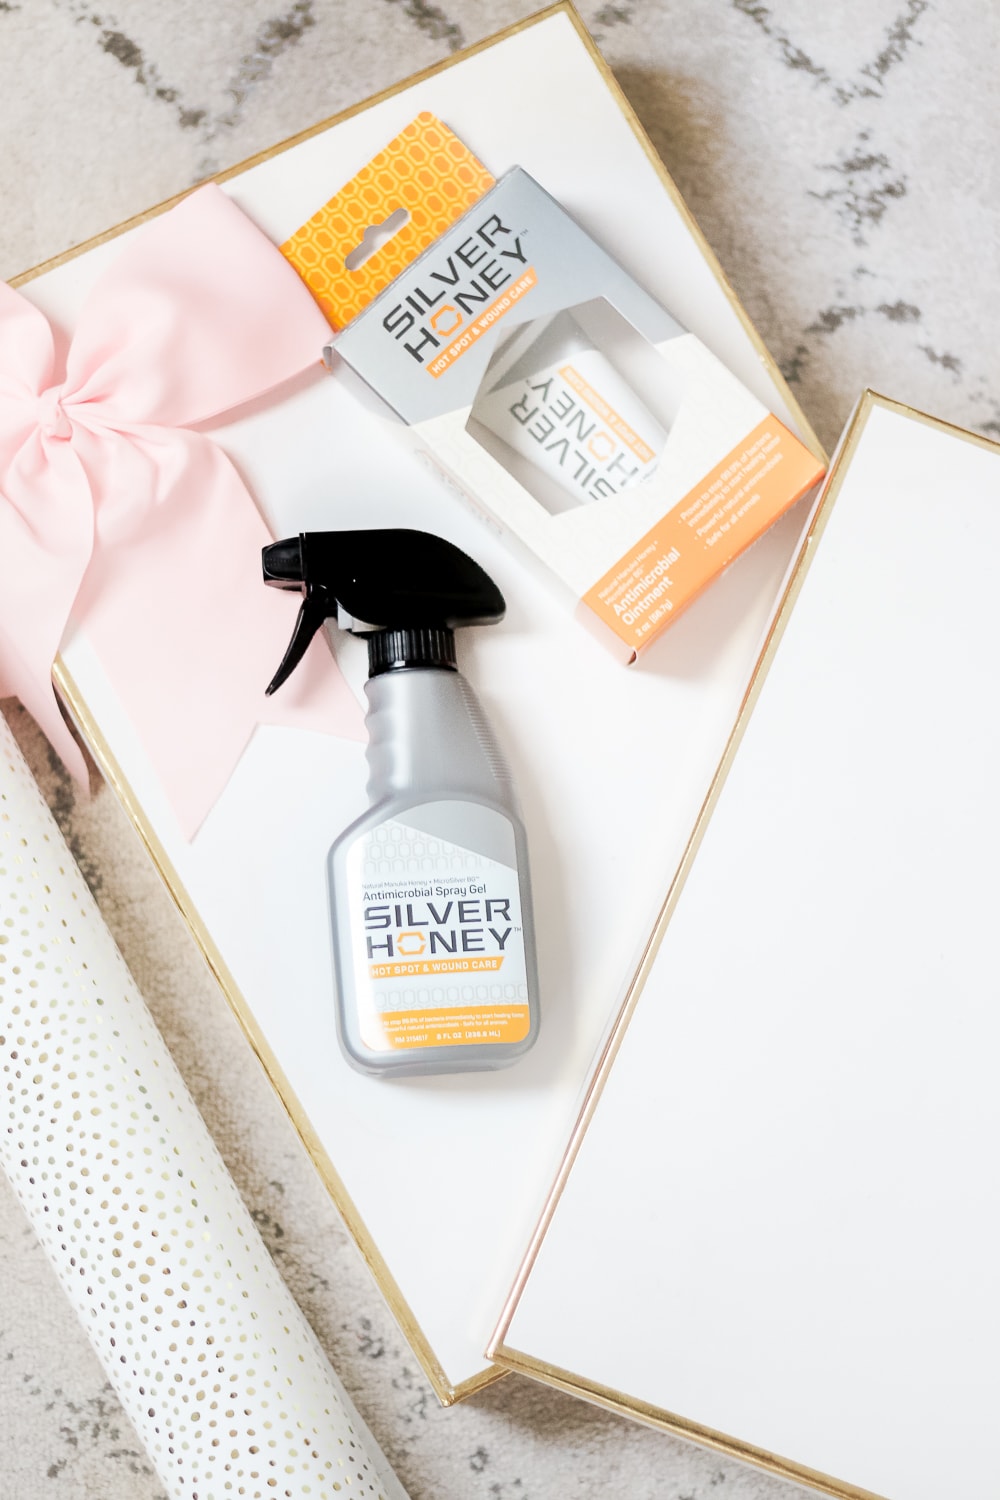 Silver Honey Antimicrobial Spray Gel and Silver Honey Antimicrobial Ointment featured in blogger Stephanie Ziajka's DIY pet first aid kit on Diary of a Debutante